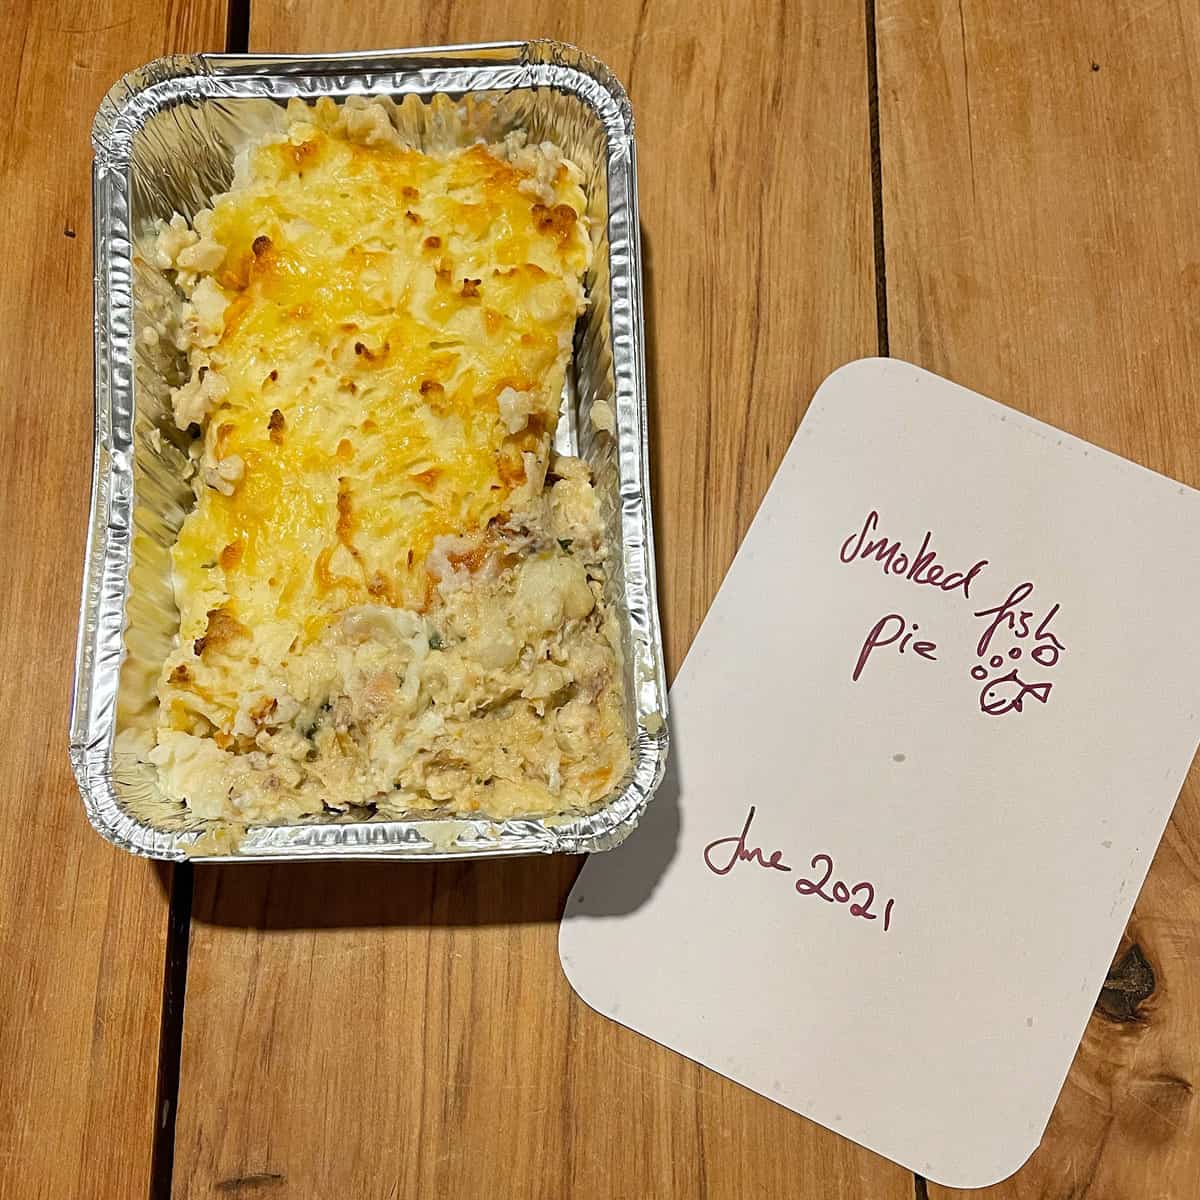 Leftover smoked fish pie in a foil tray for the freezer.